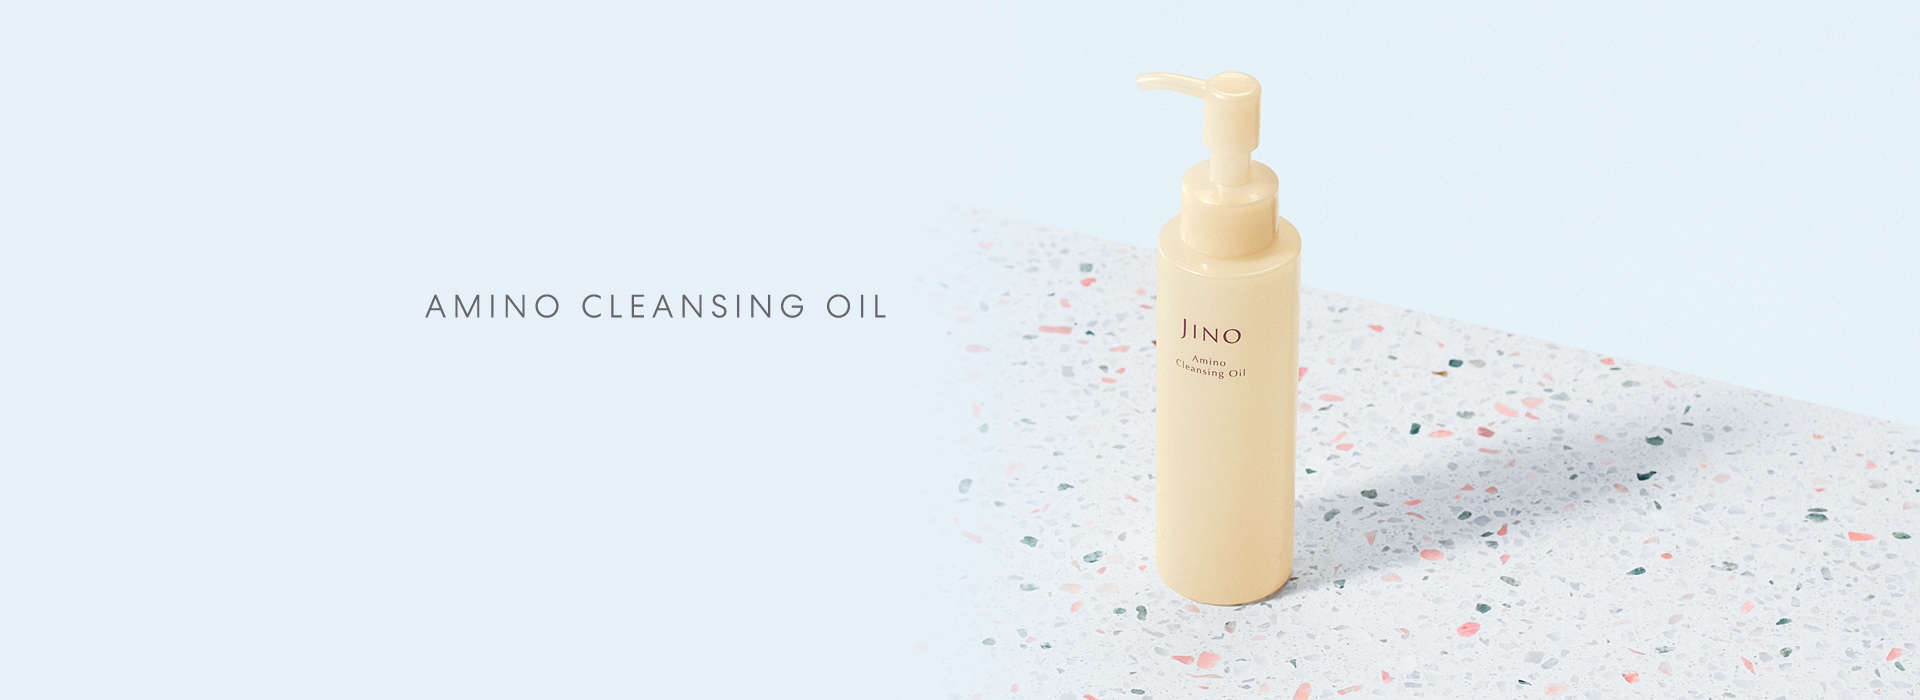 AMINO CLEANSING OIL